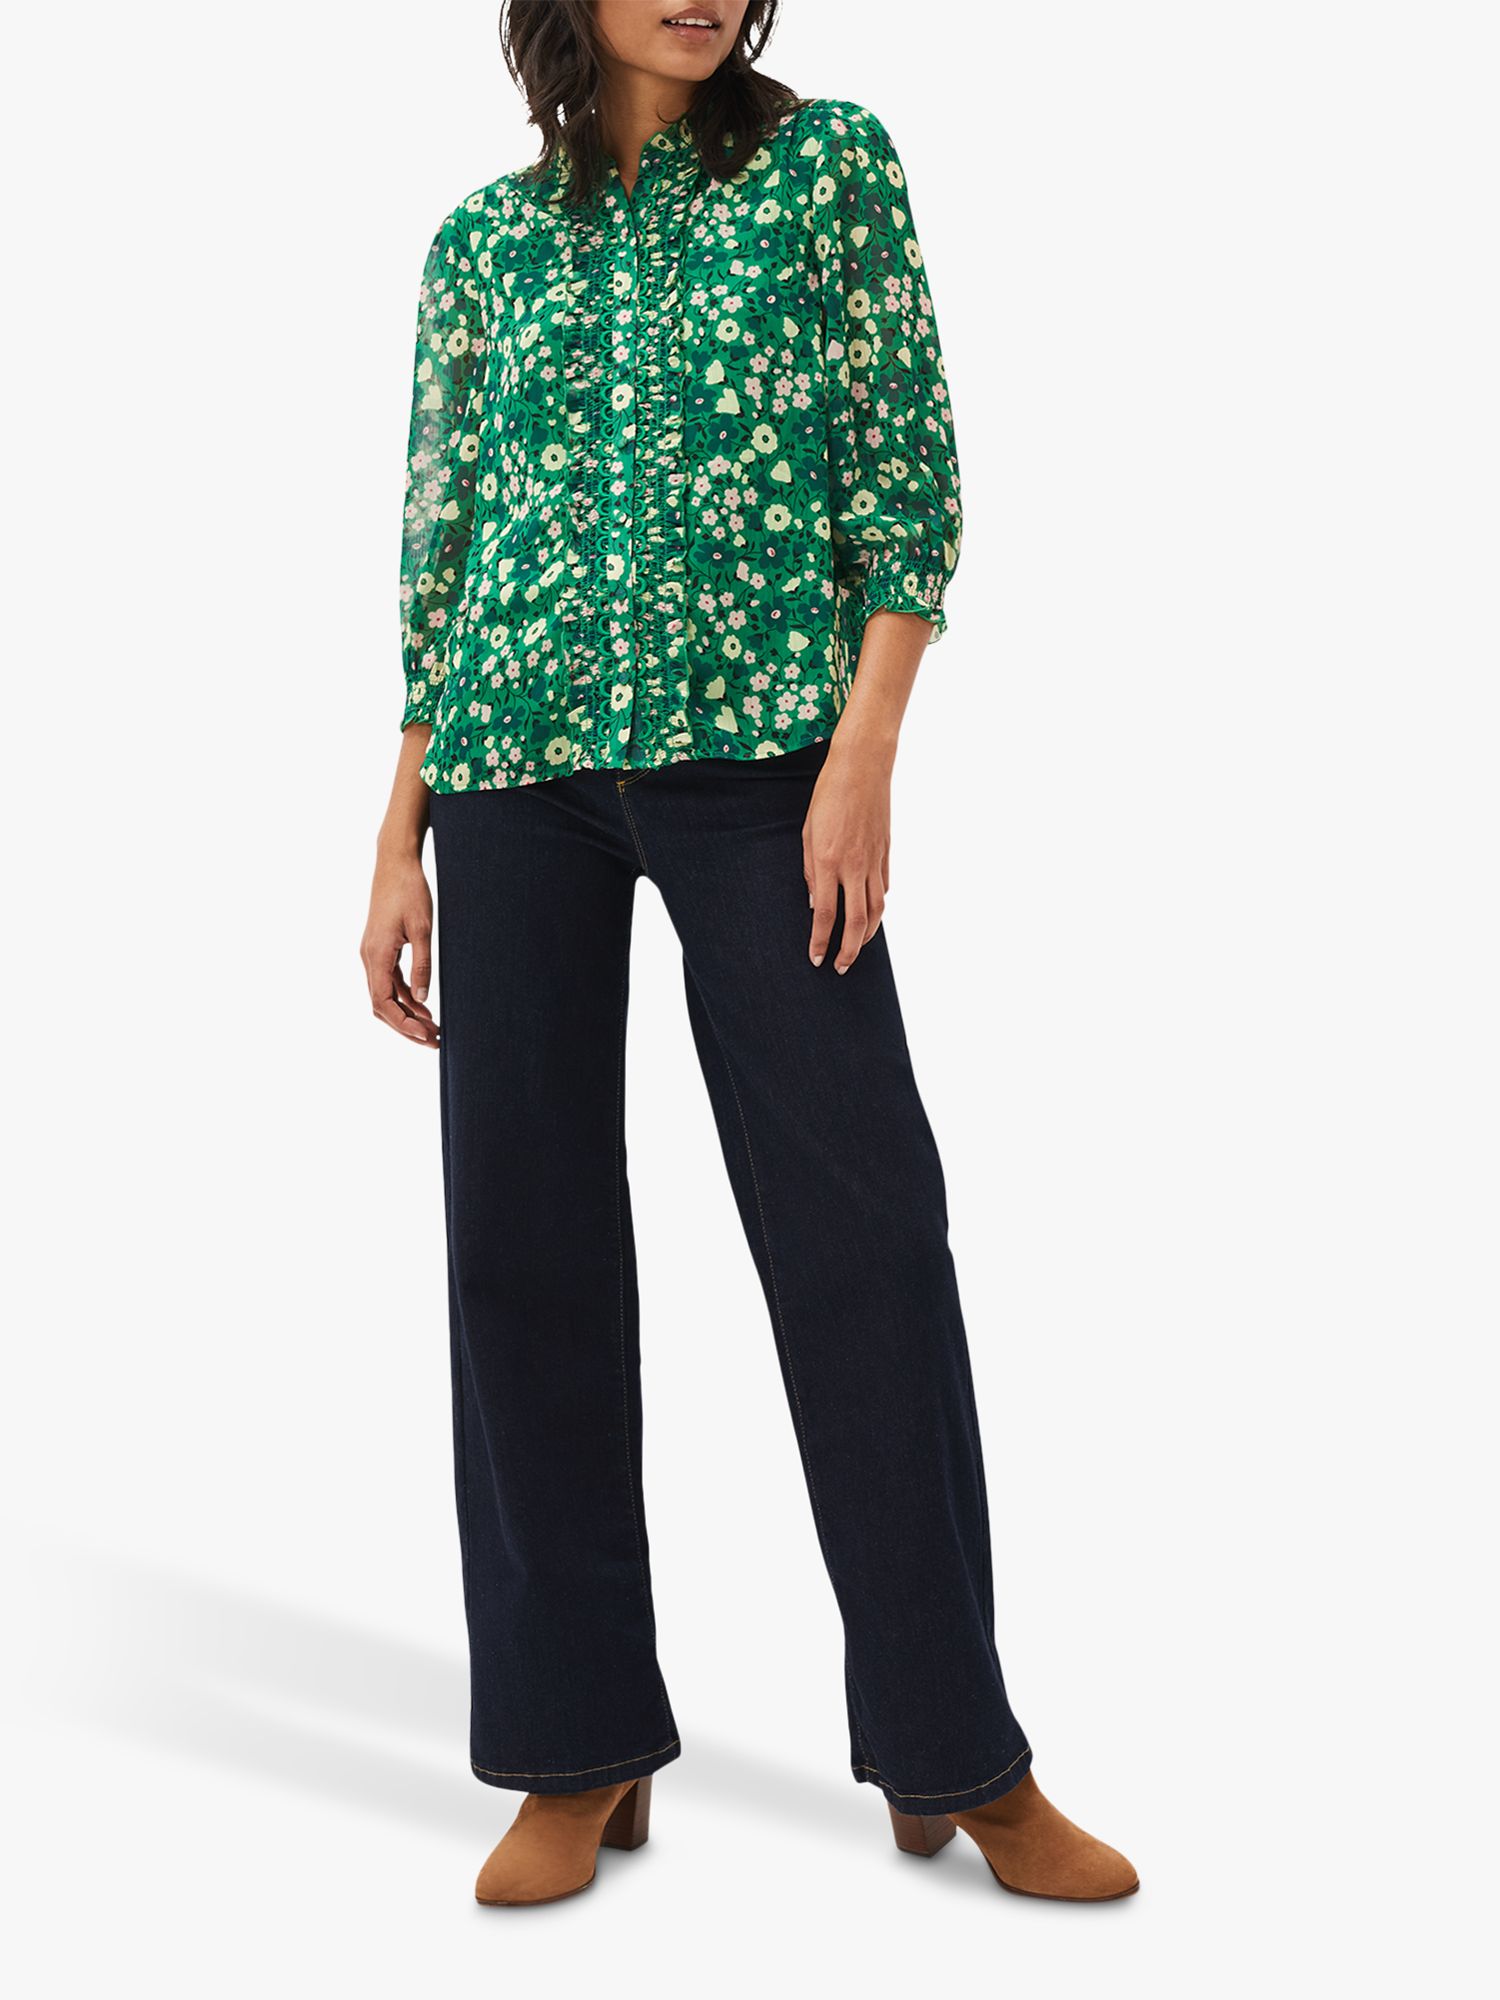 Phase Eight Ava Floral Blouse, Green